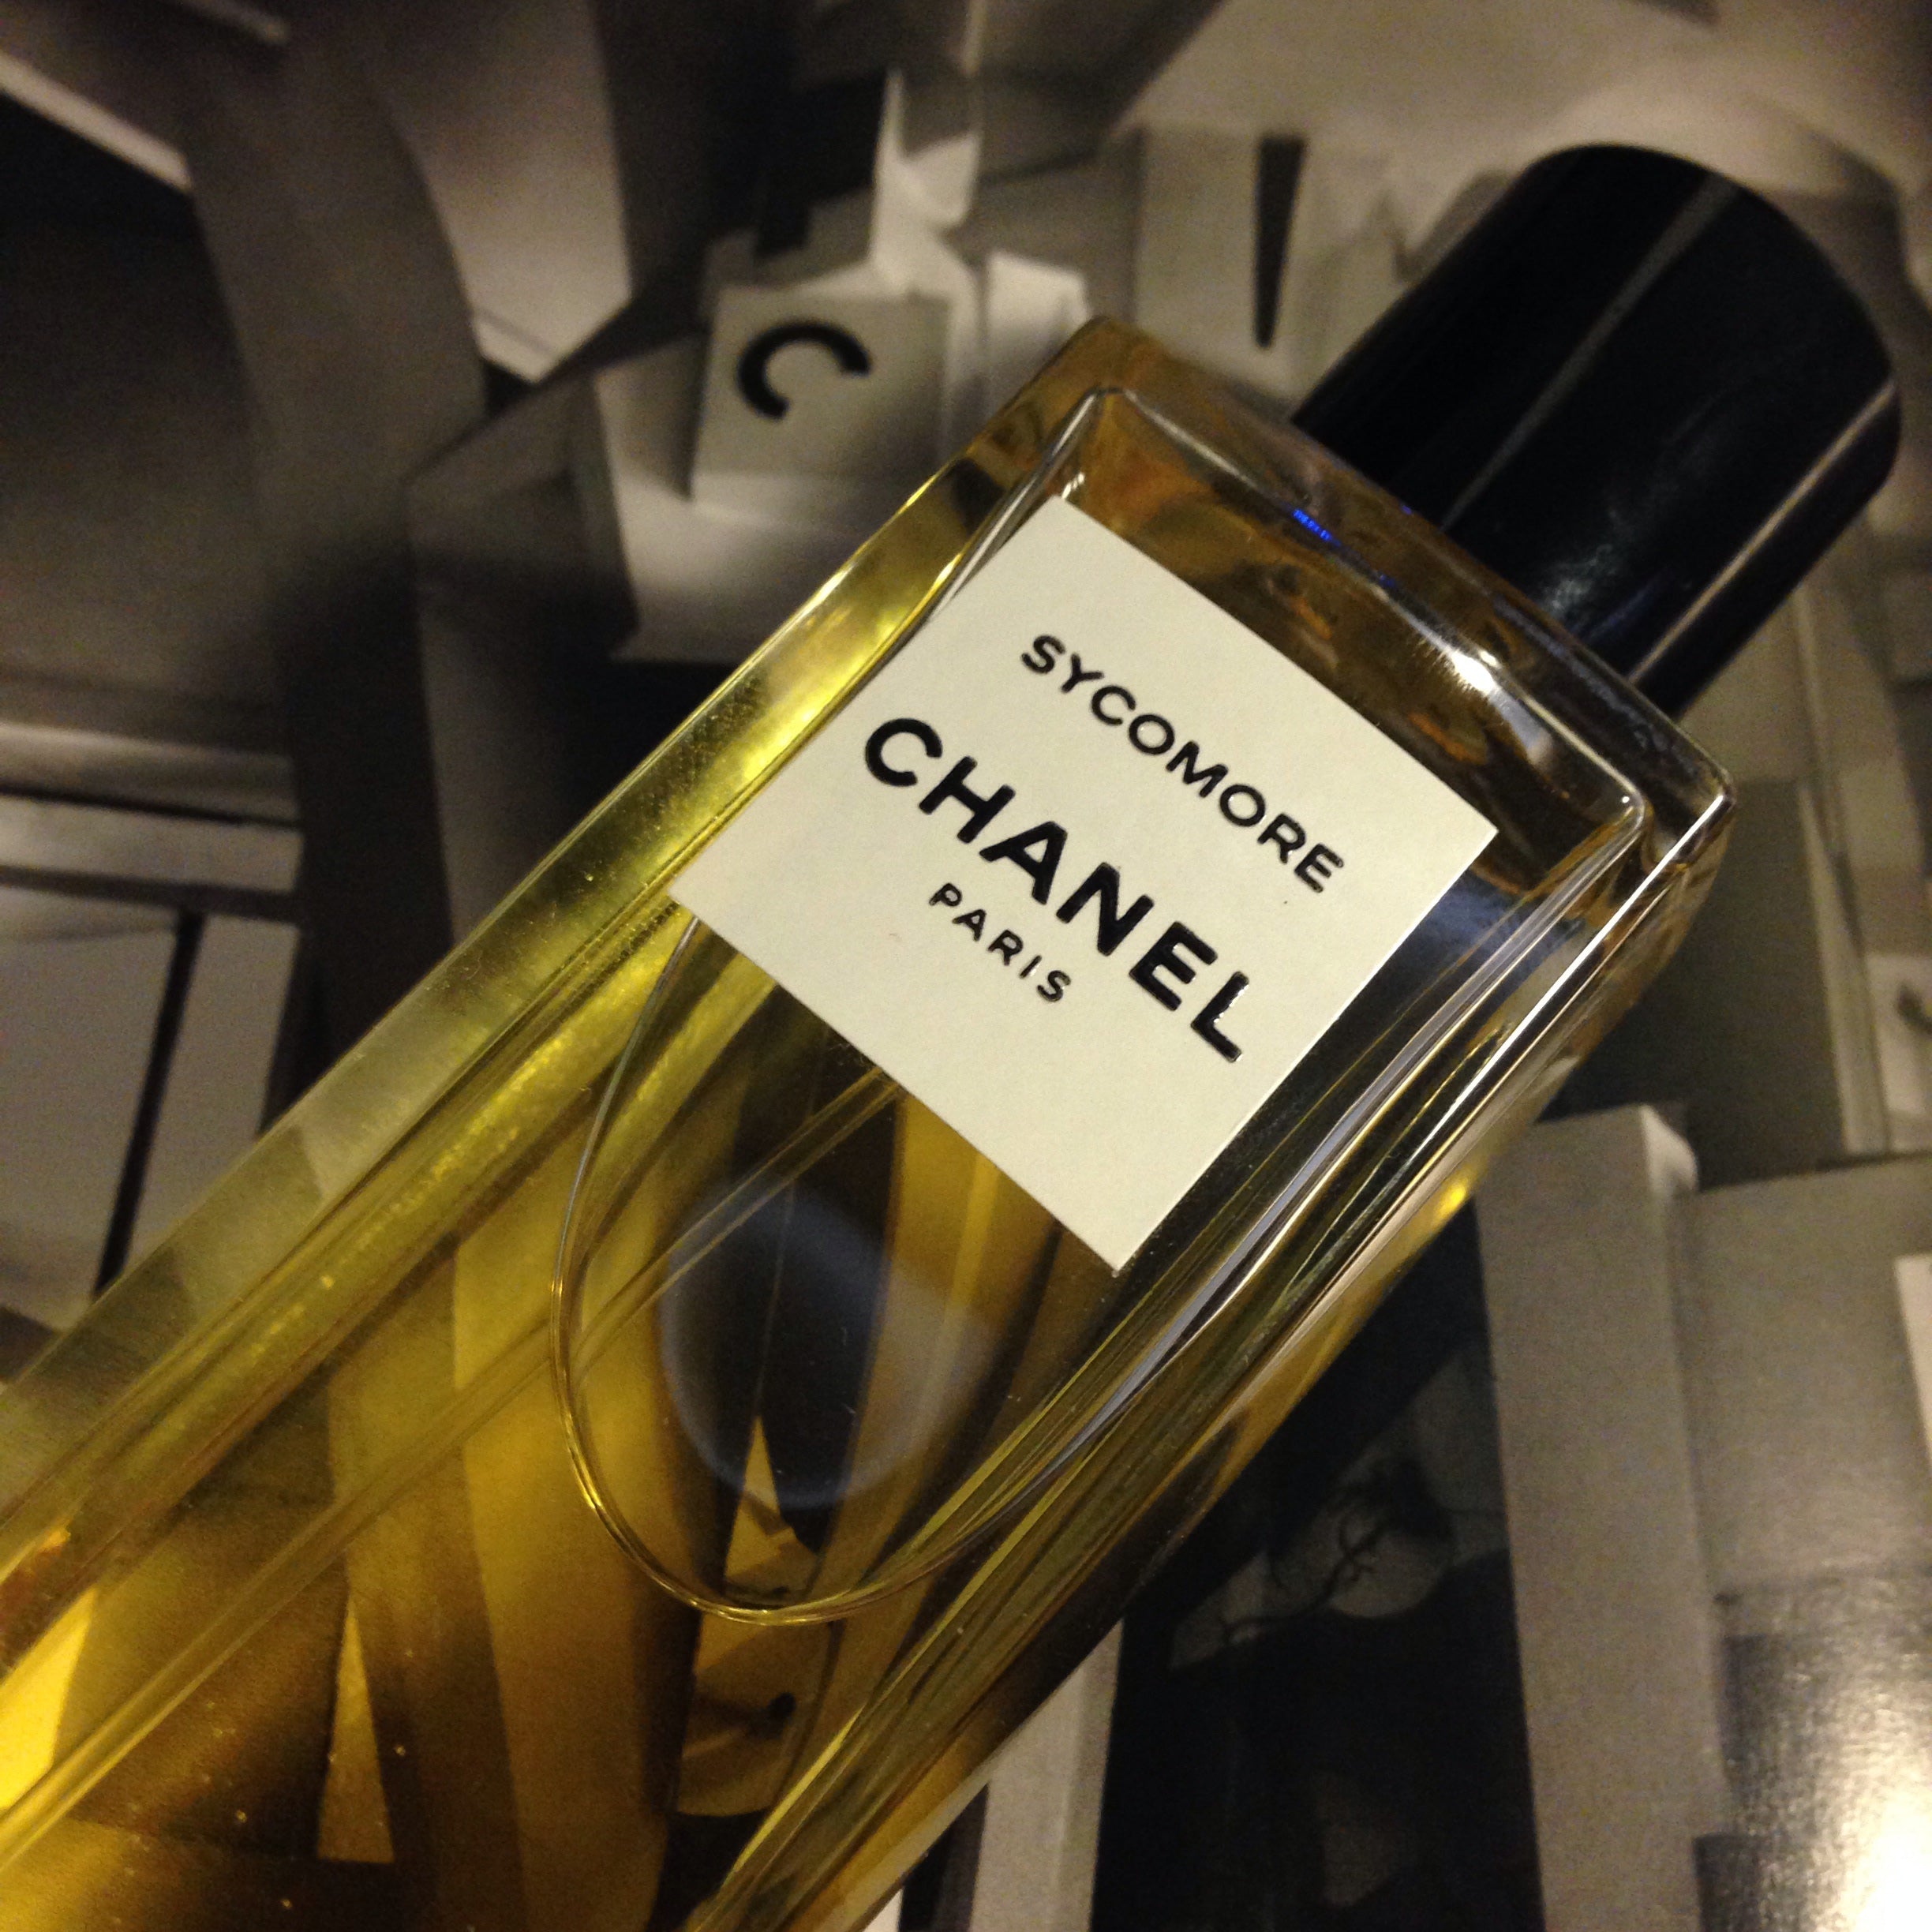 Sycomore Parfum Chanel perfume - a new fragrance for women and men